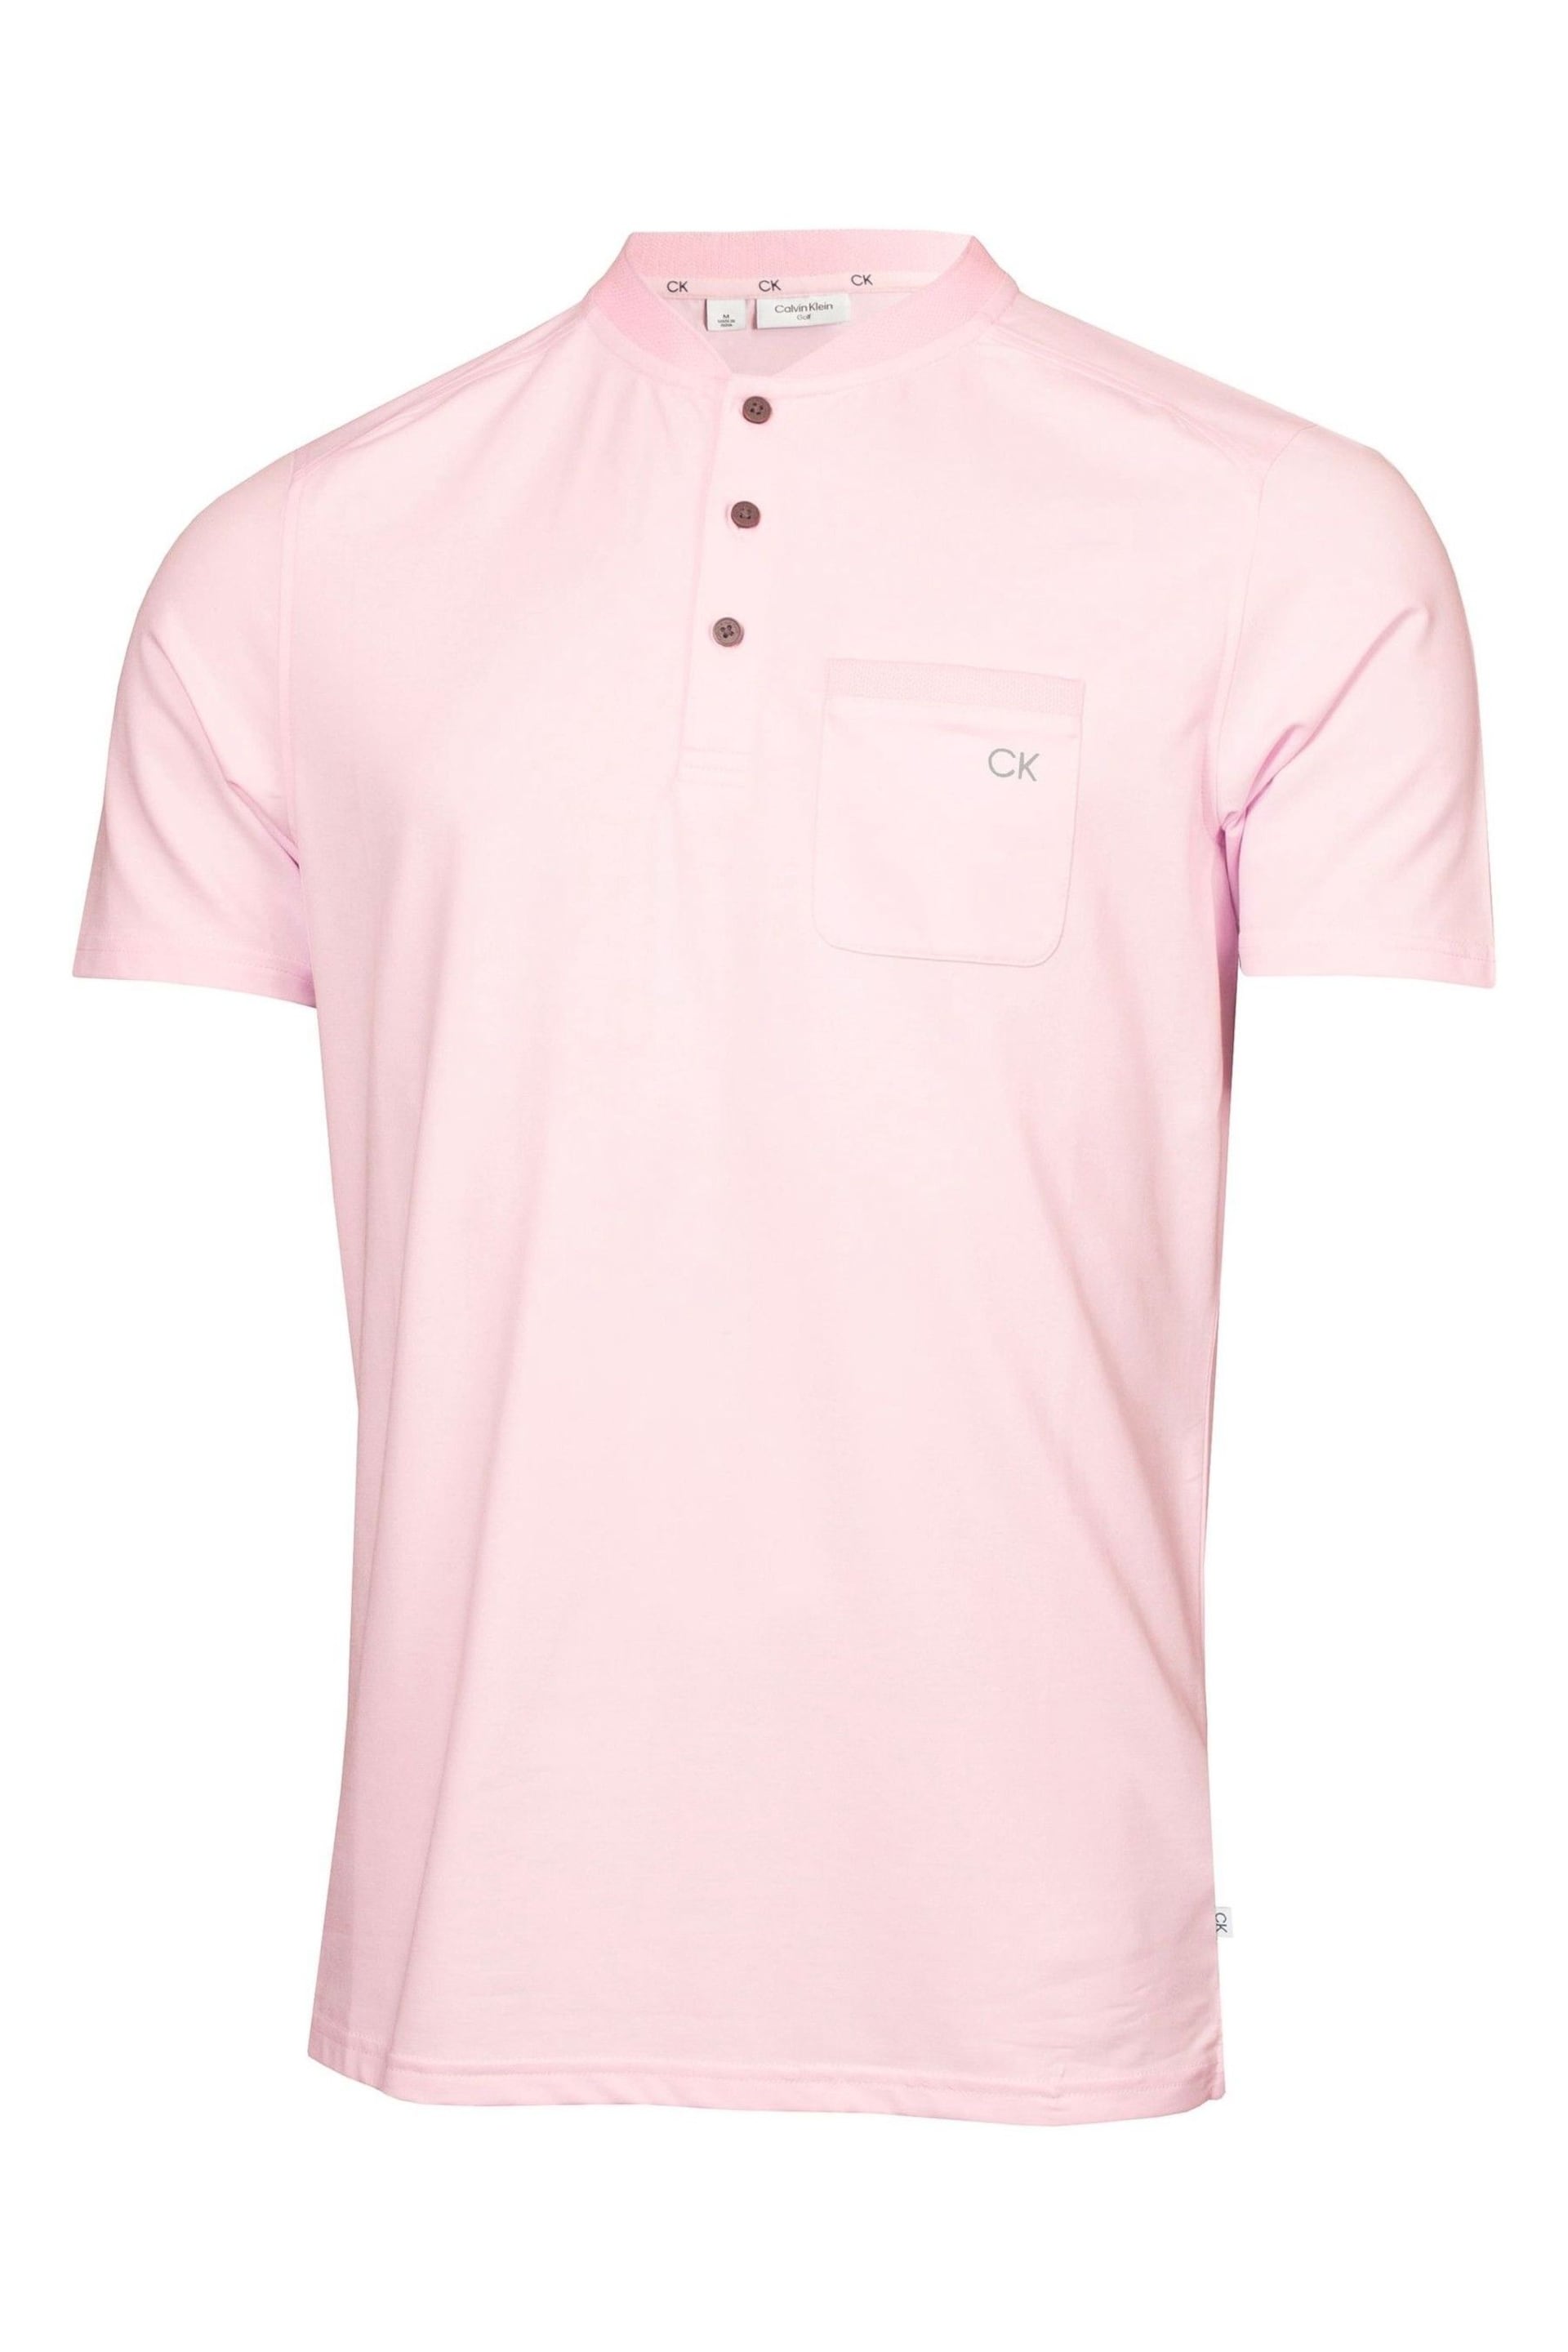 Calvin Klein Golf Pink Middlebrook Polo Shirt - Image 5 of 8